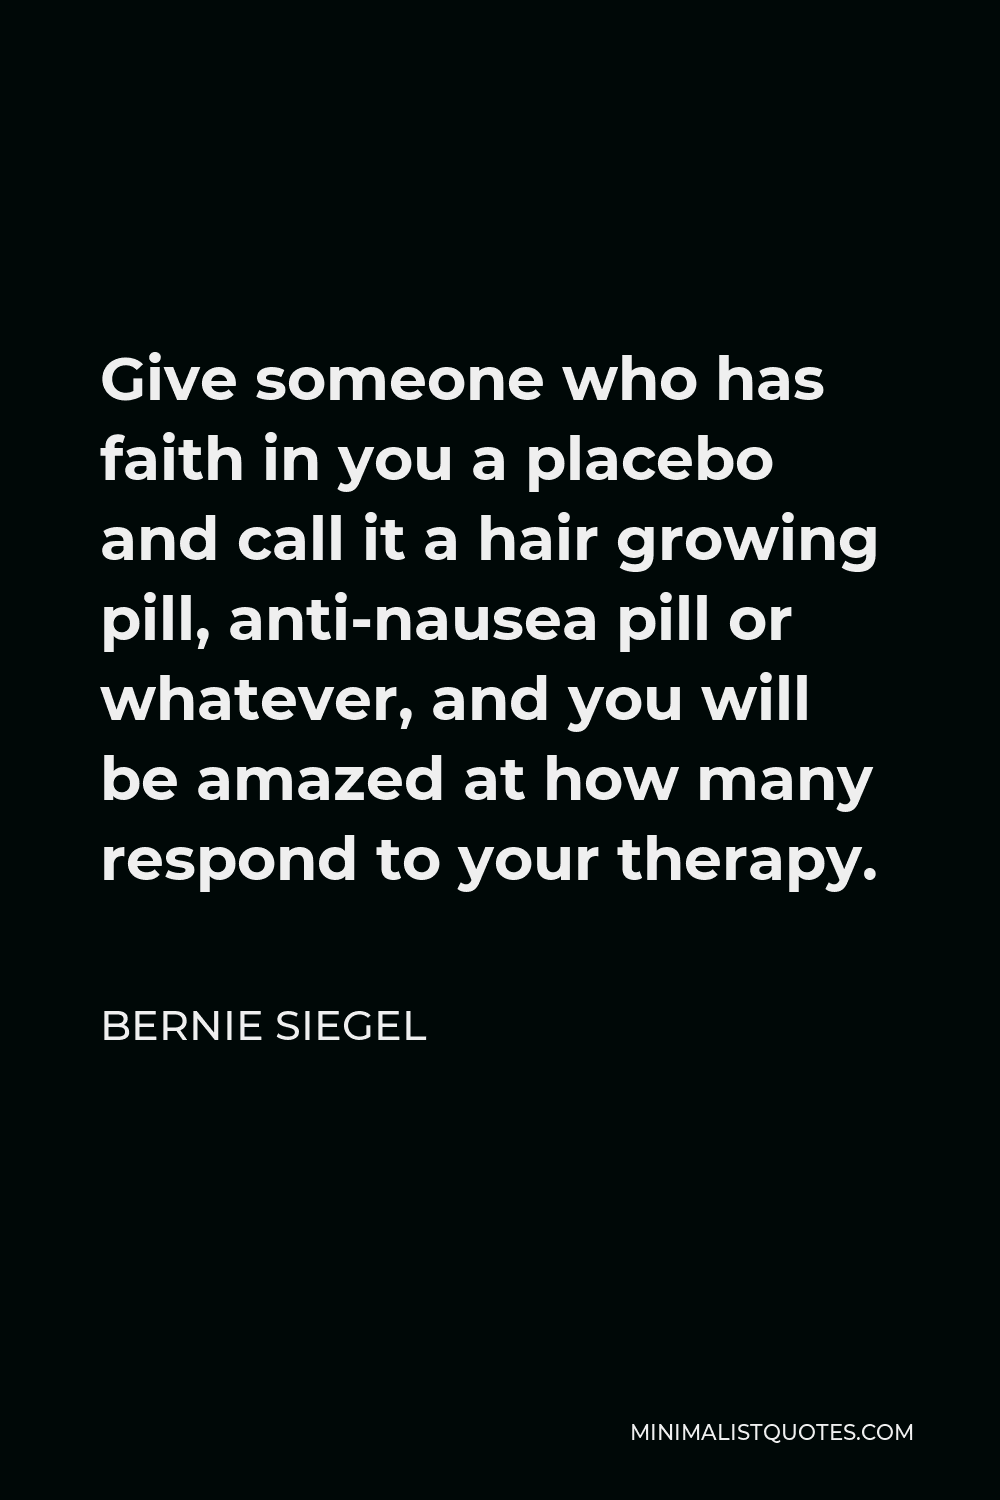 Bernie Siegel Quote - Give someone who has faith in you a placebo and call it a hair growing pill, anti-nausea pill or whatever, and you will be amazed at how many respond to your therapy.